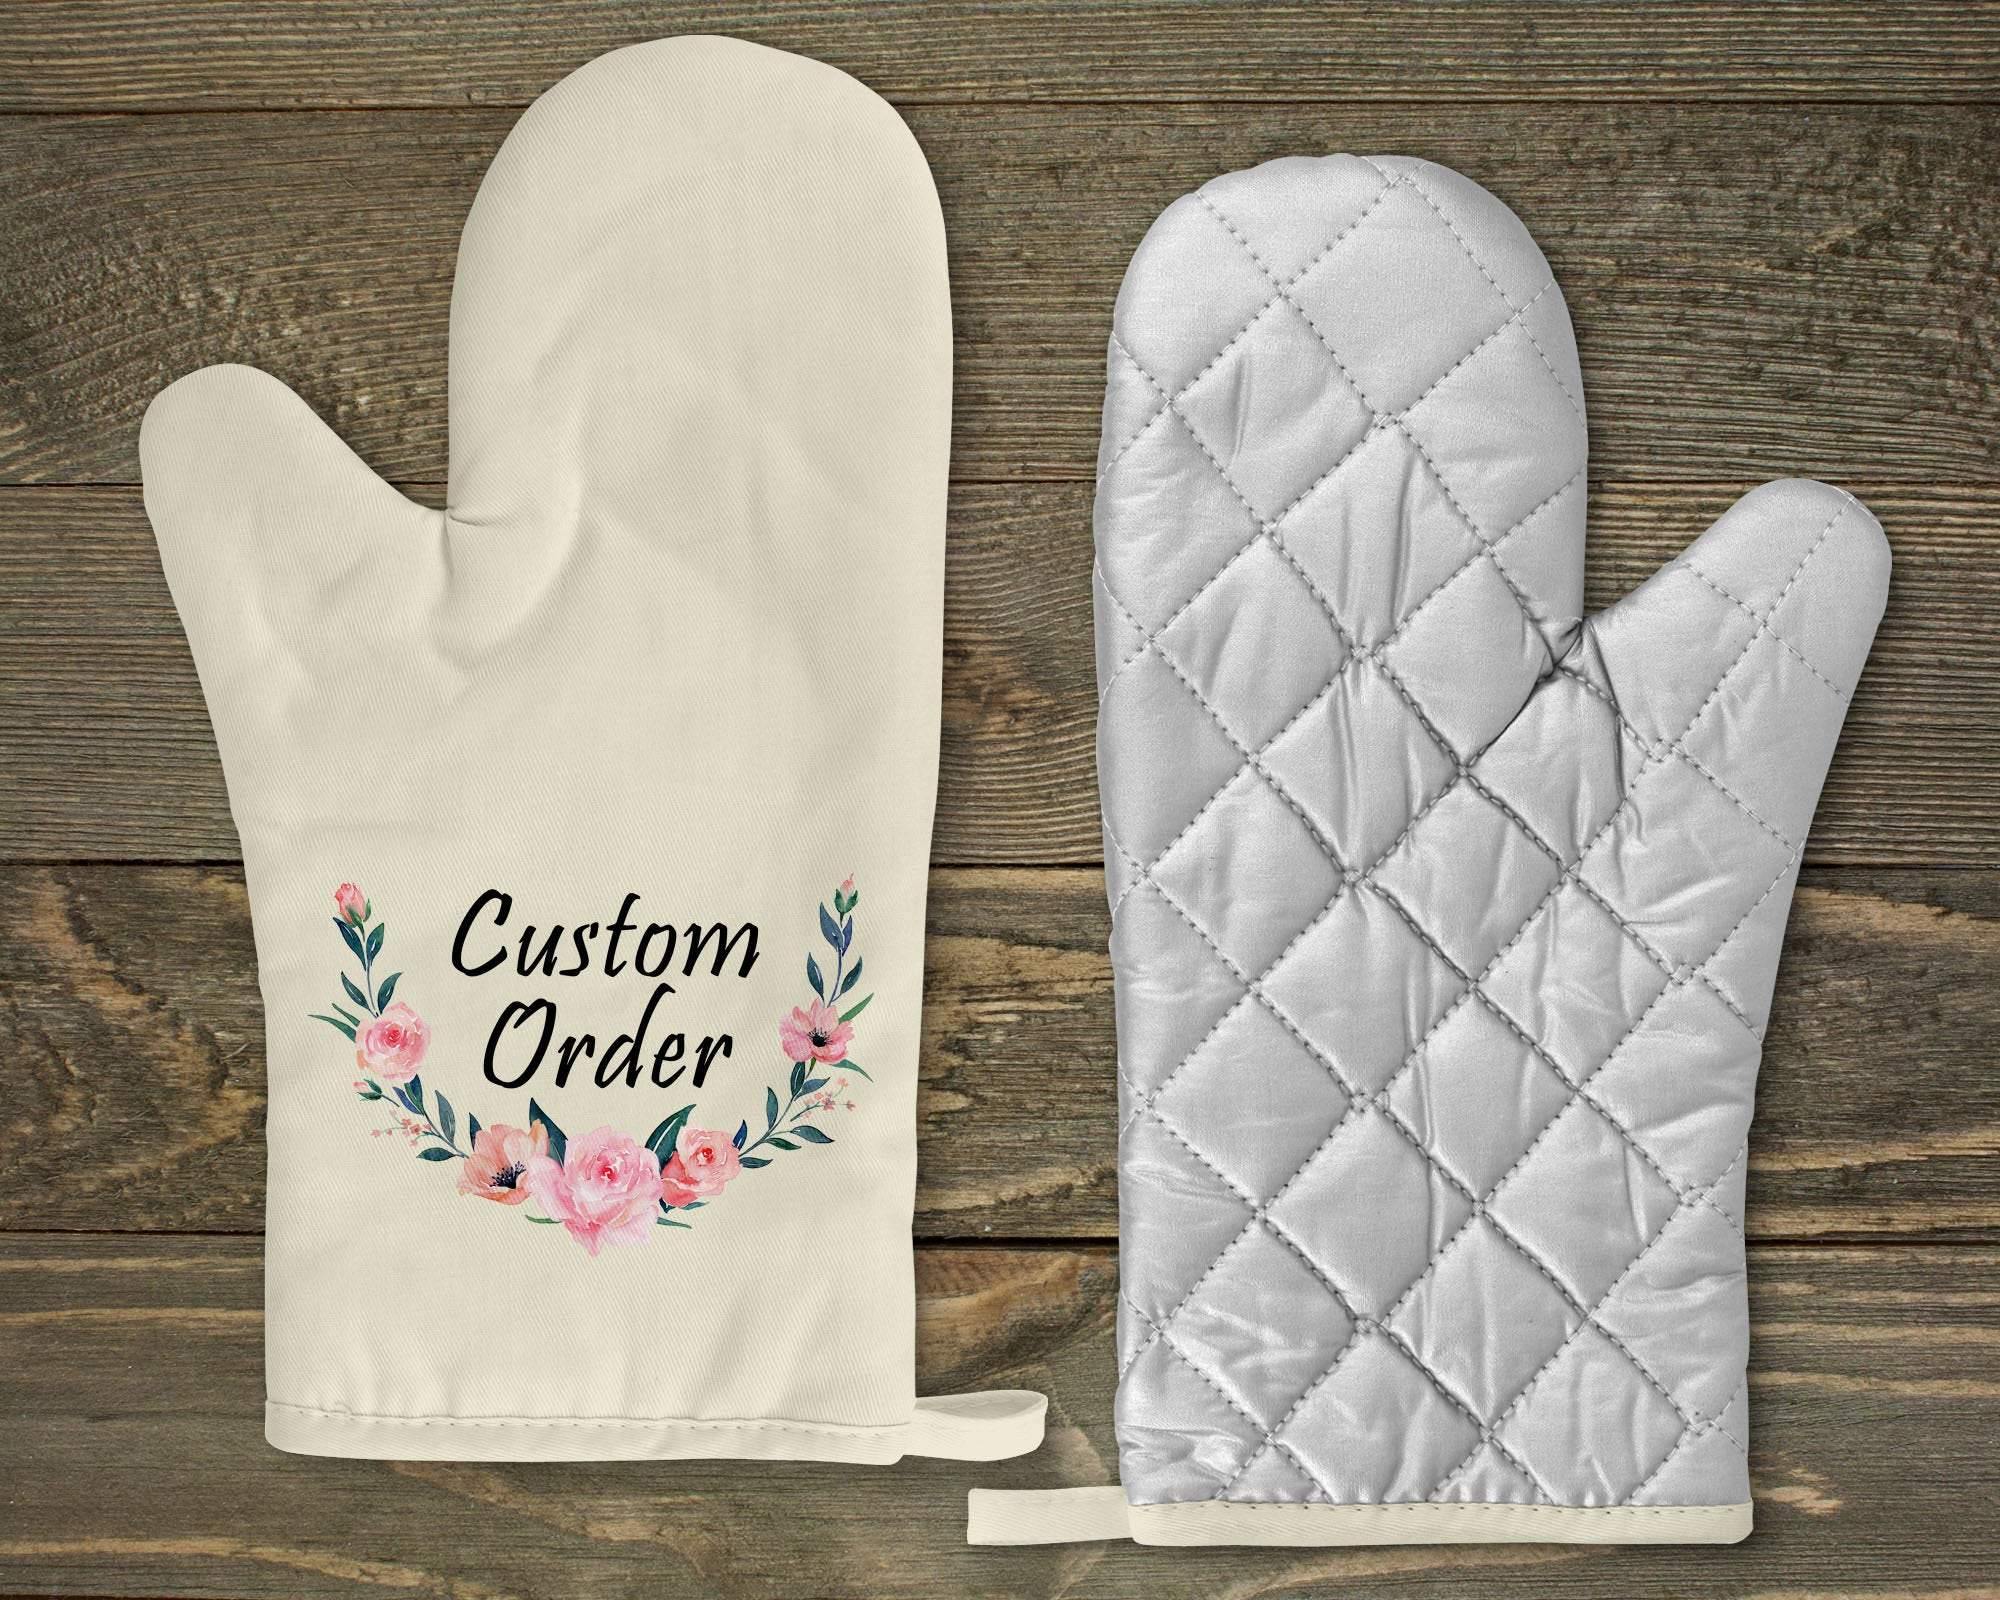 Personalized Oven Mitts | Custom Kitchen Decor | Custom Order - This & That Solutions - Personalized Oven Mitts | Custom Kitchen Decor | Custom Order - Personalized Gifts & Custom Home Decor